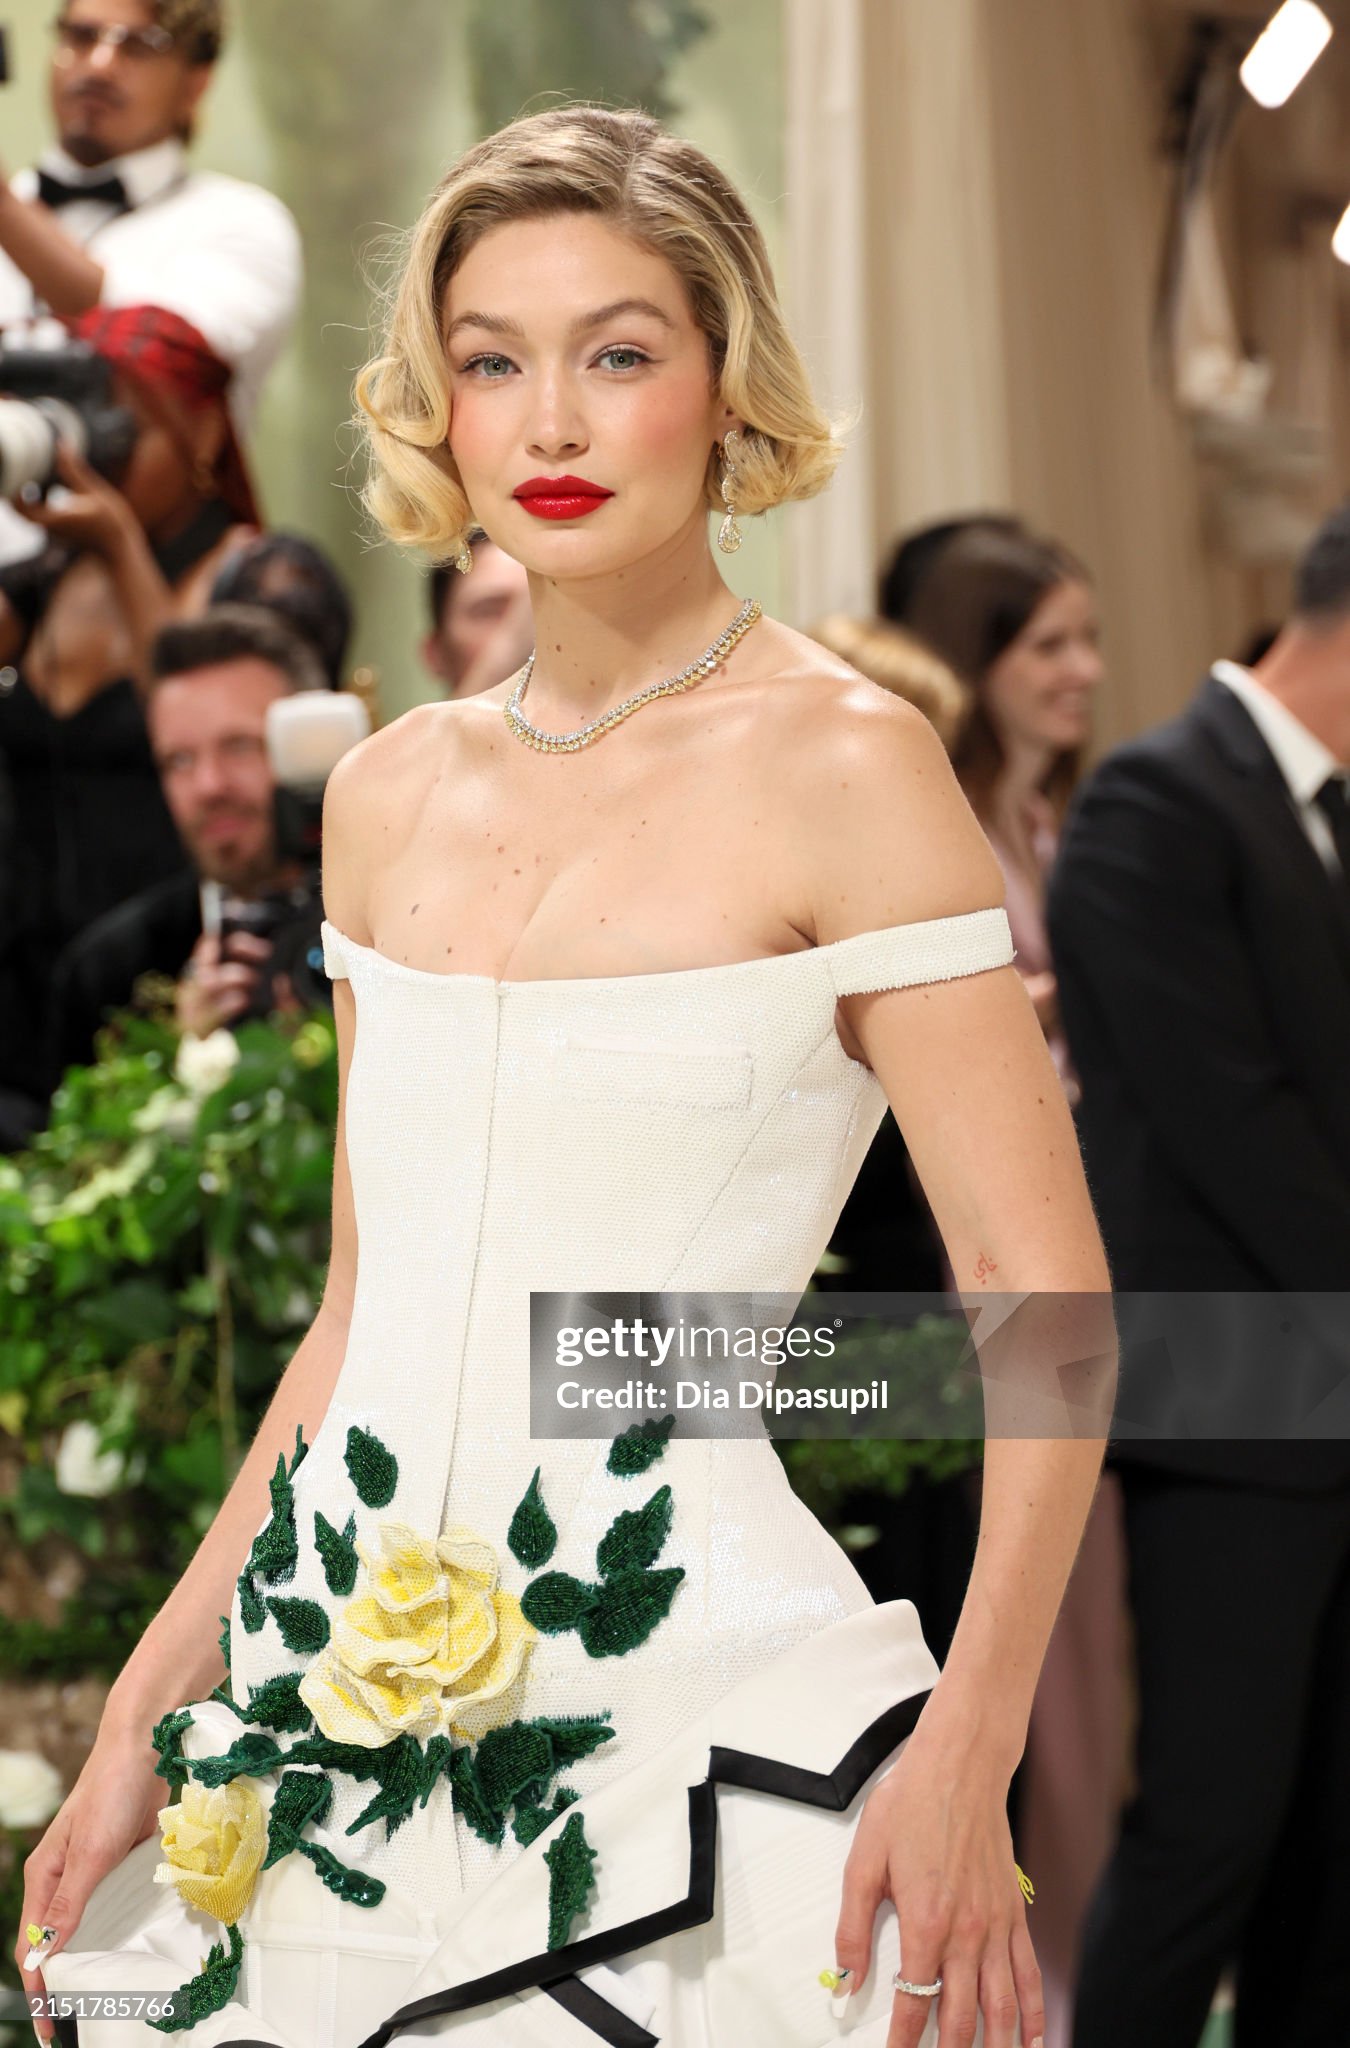 gettyimages-2151785766-2048x2048.jpg